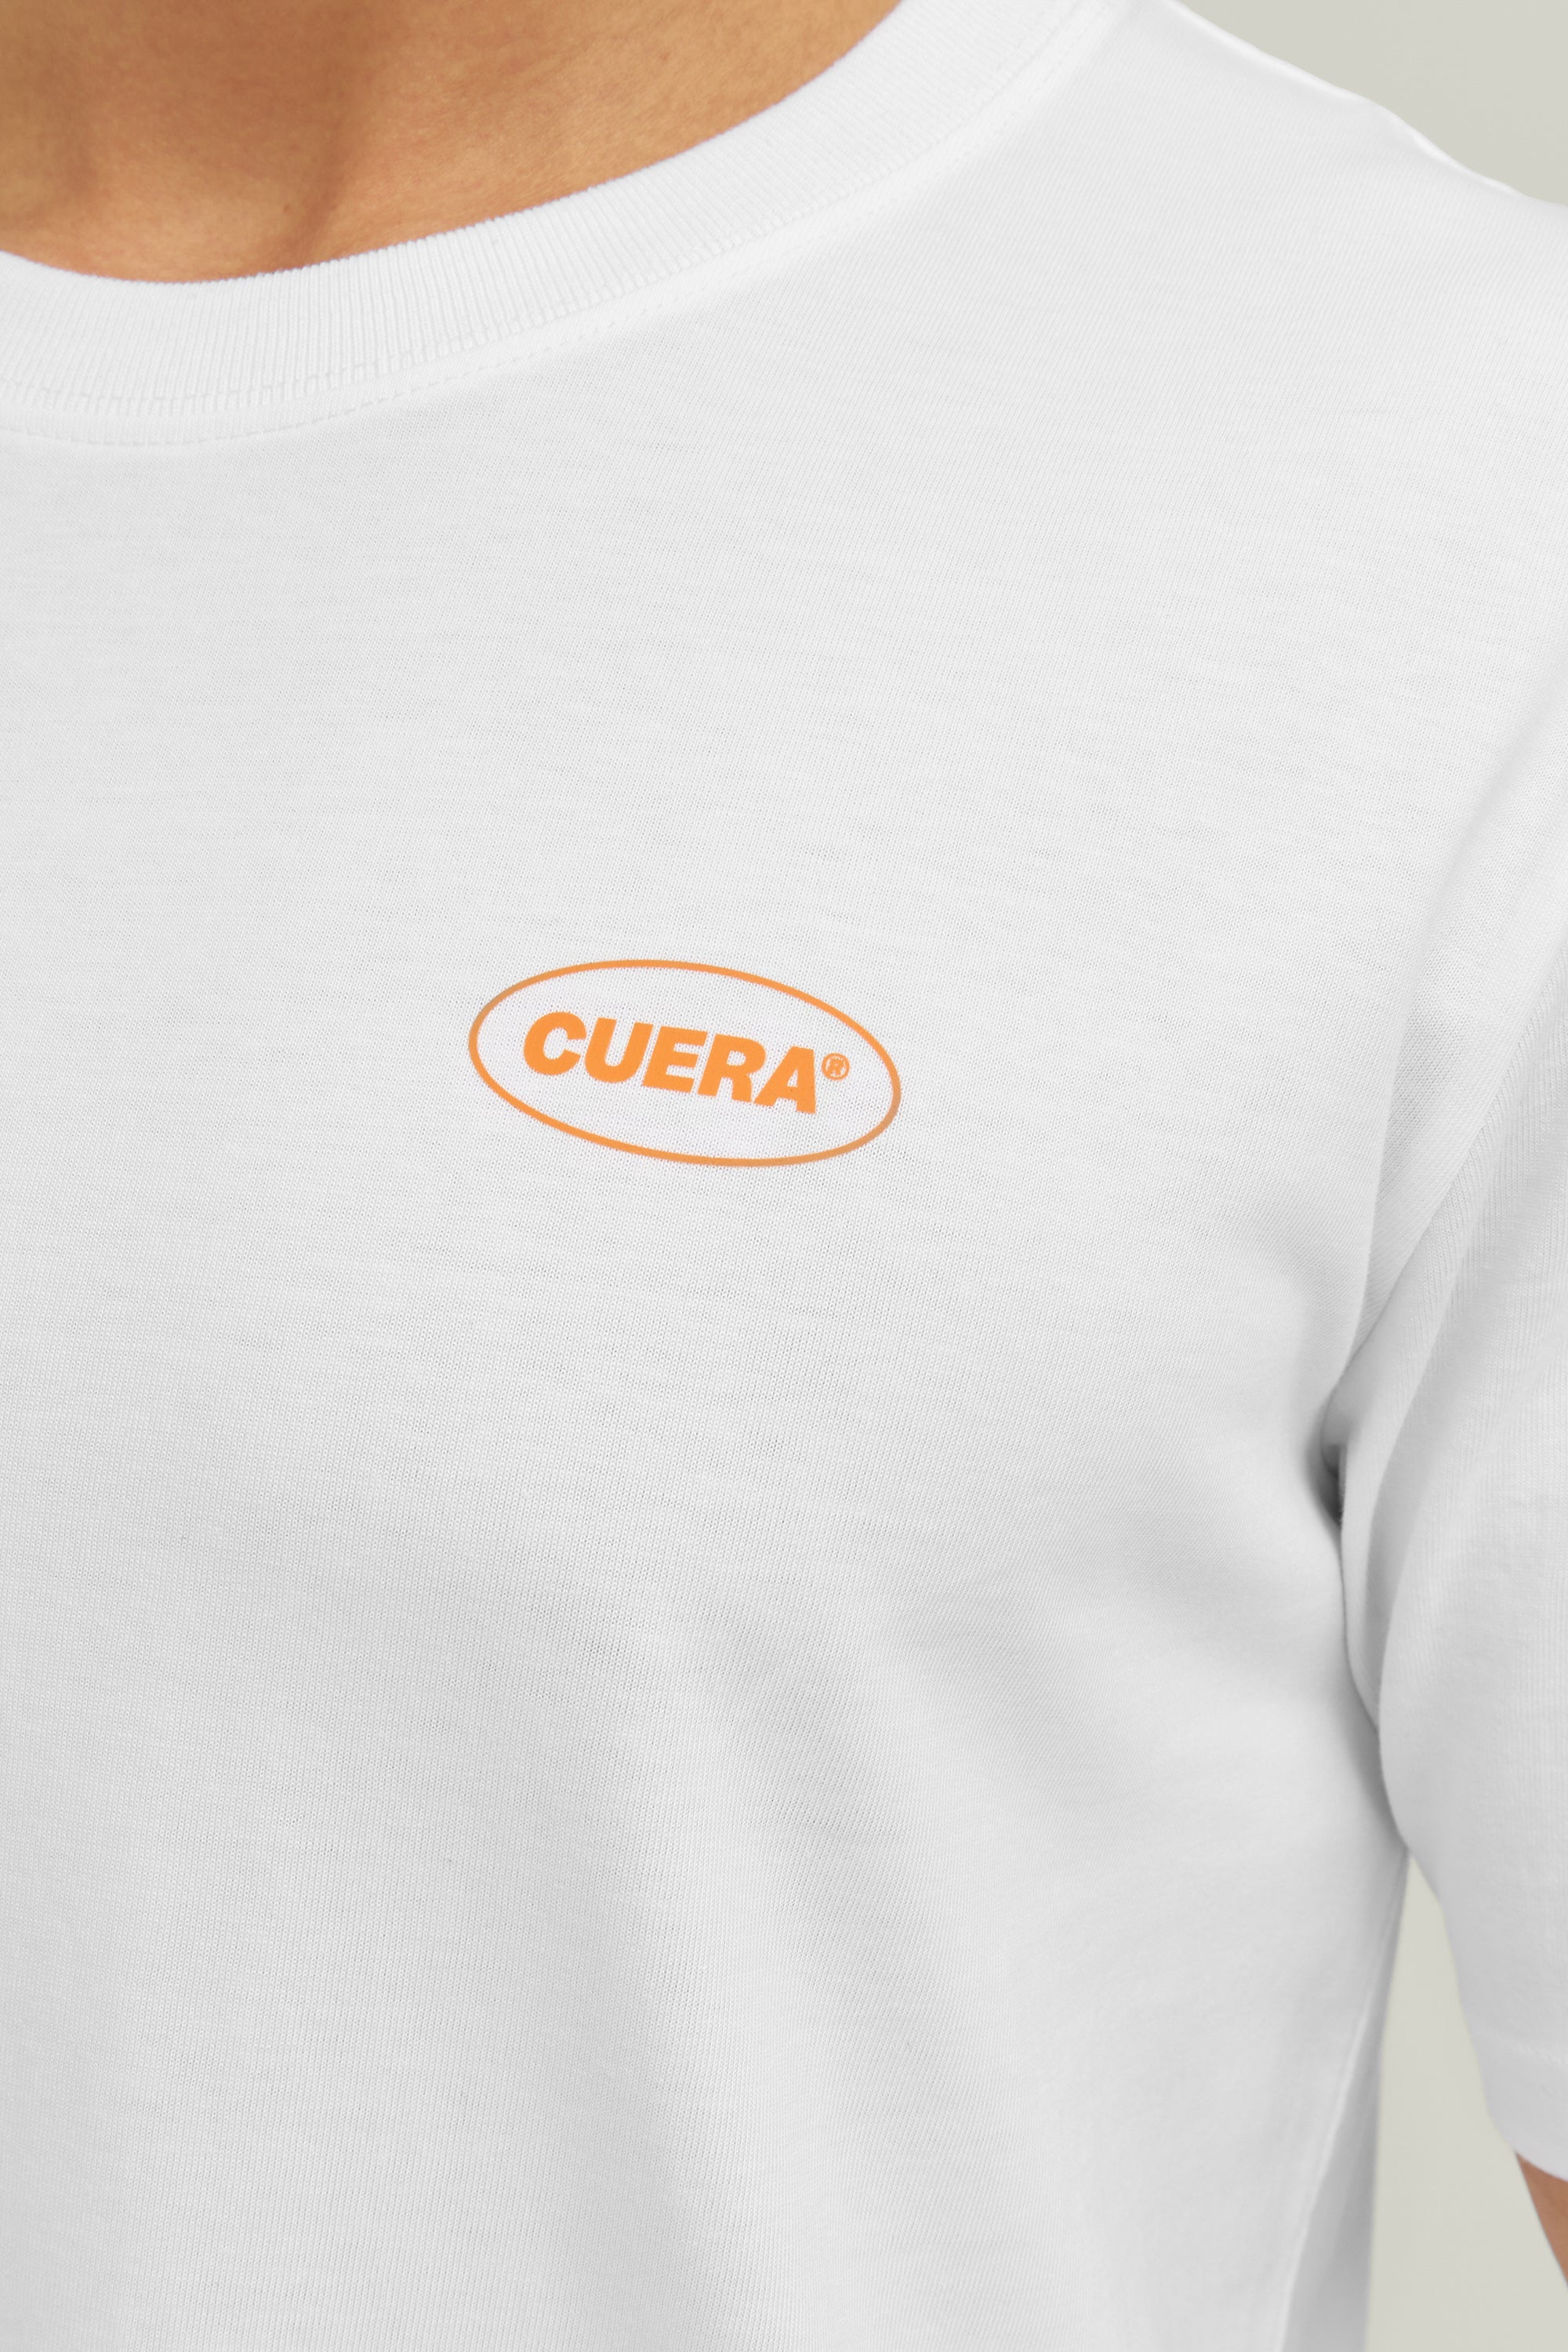 Cuera Relaxed Heavy offcourt T-shirt (Wit)